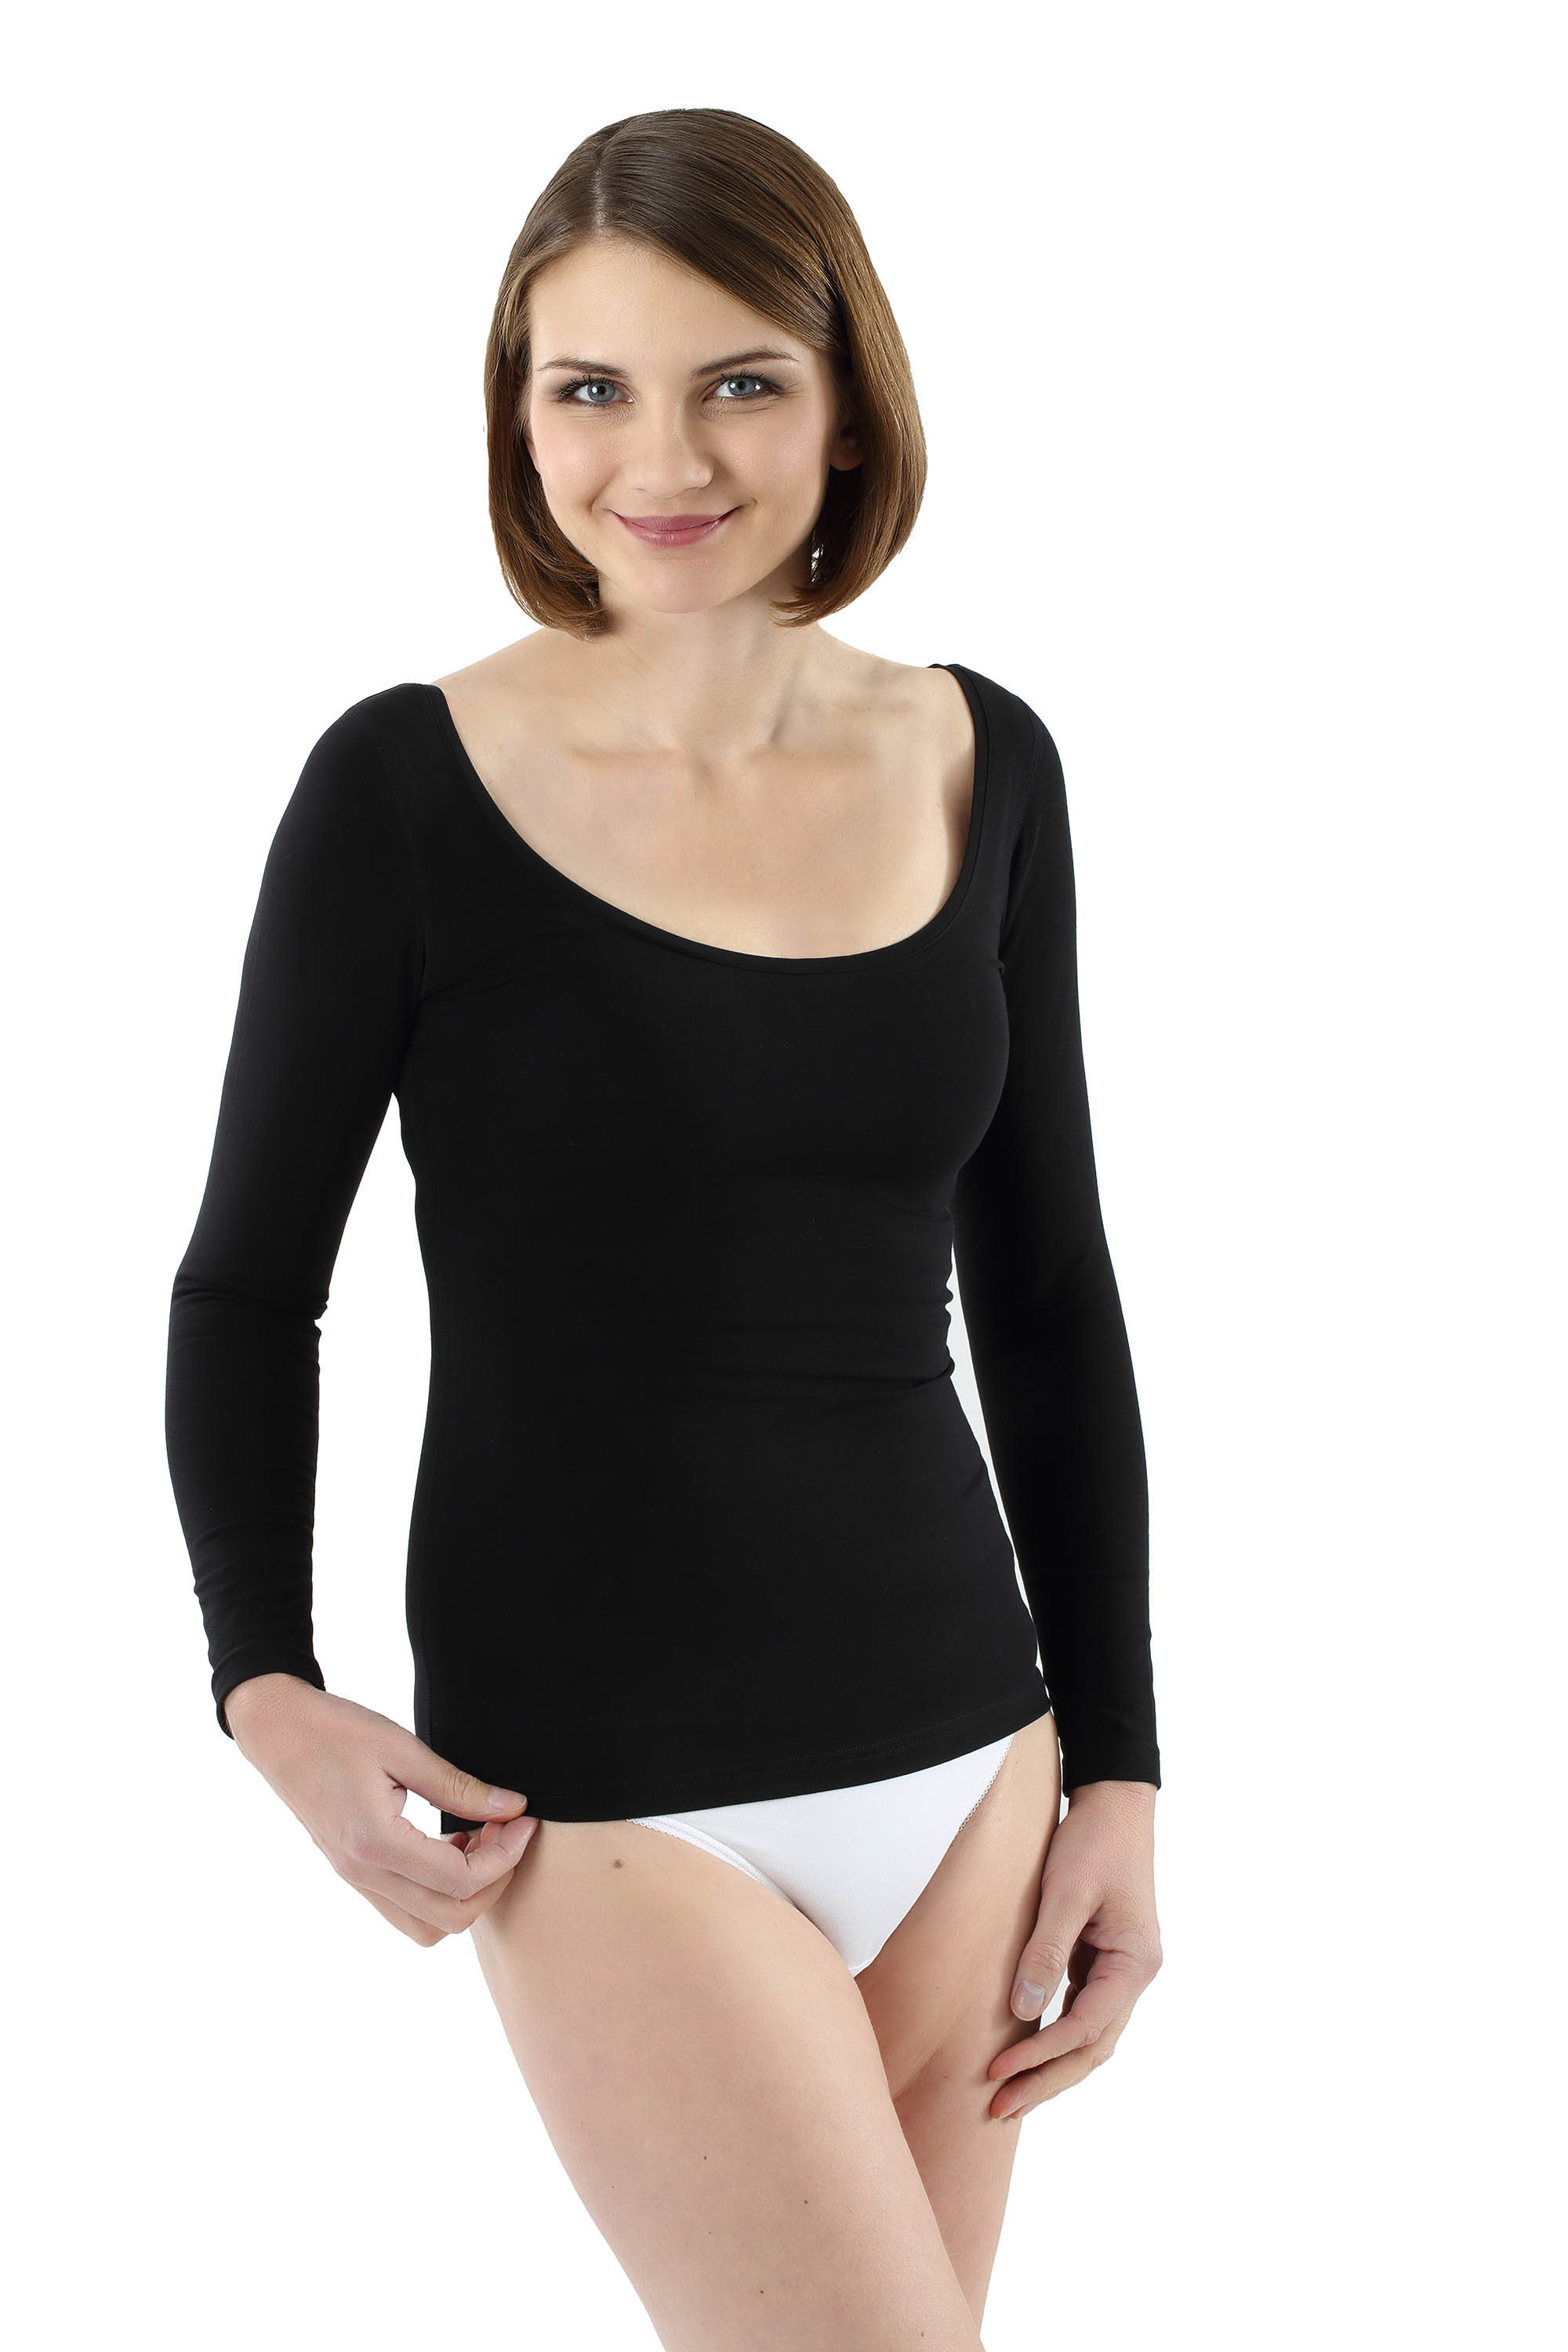 Women S Long Sleeve Undershirt With Deep Scoop Neck Stretch Cotton